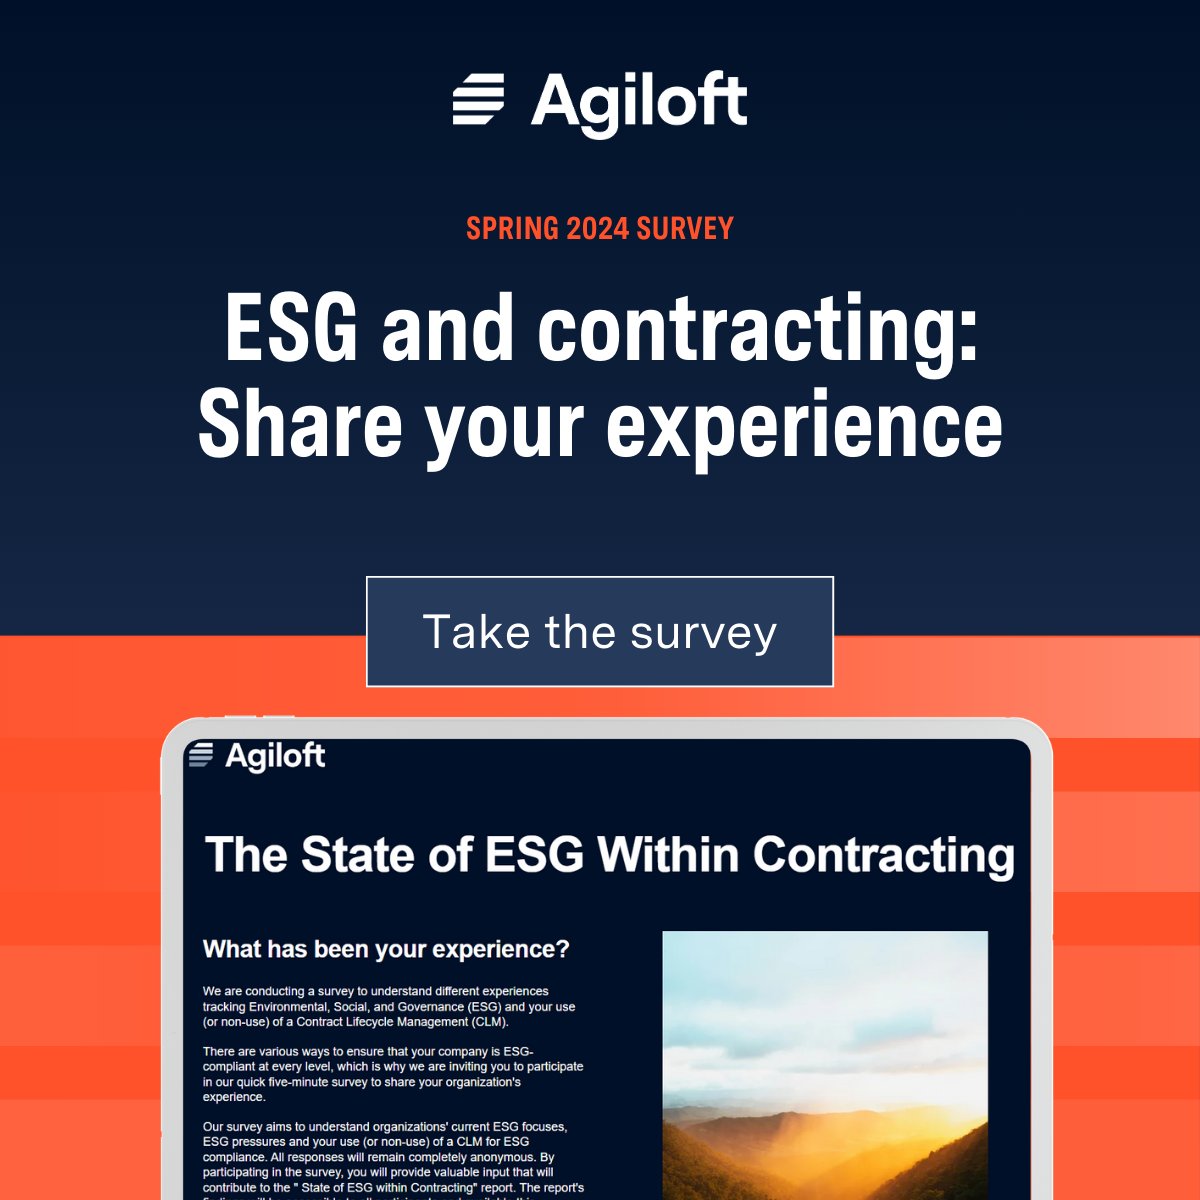 Got a sec? 🕒 Take a super quick #ESG survey and spill the tea 🍵 on your #contracting game! Agiloft is curious about your experiences with #ESG and #contracting. What has been your experience? Take our quick survey now: hubs.li/Q02w2VS00